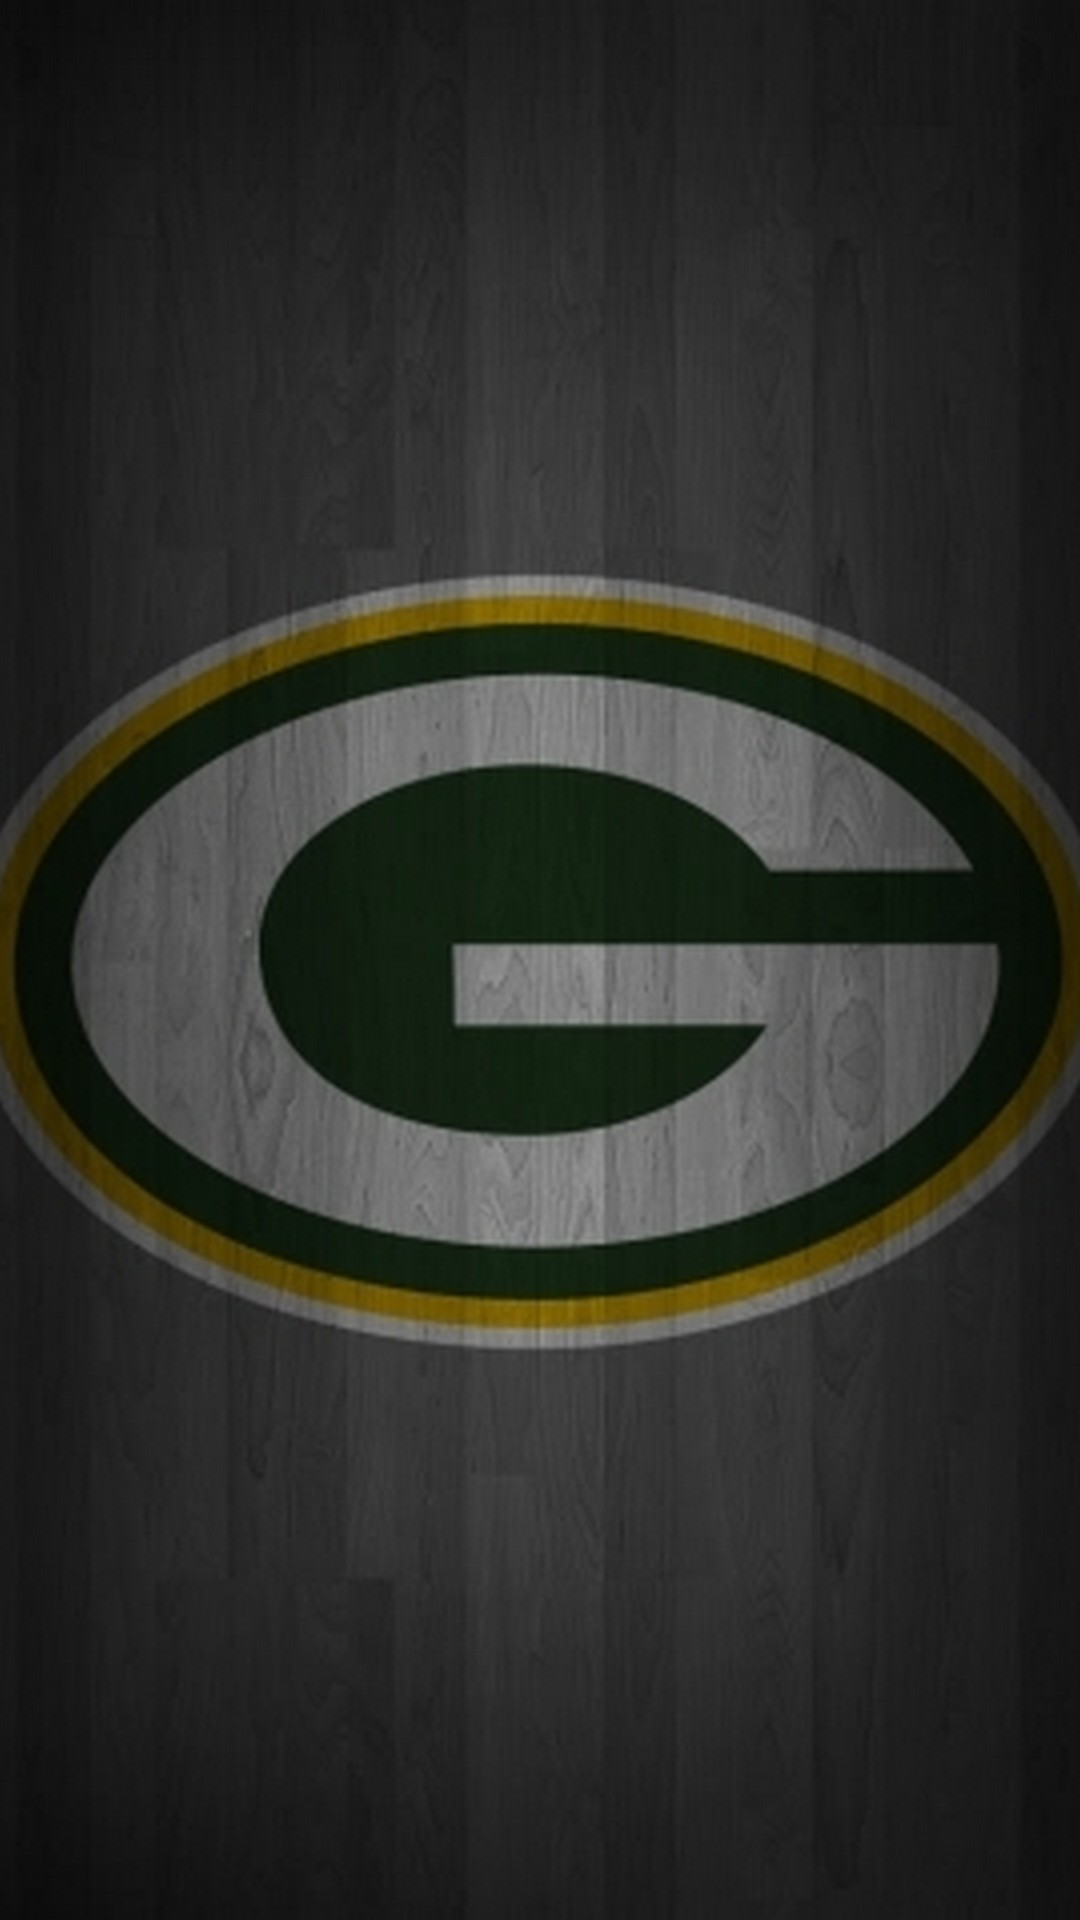 Green Bay Packers NFL iPhone Screen Wallpaper With high-resolution 1080X1920 pixel. Donwload and set as wallpaper for your iPhone X, iPhone XS home screen backgrounds, XS Max, XR, iPhone8 lock screen wallpaper, iPhone 7, 6, SE, and other mobile devices